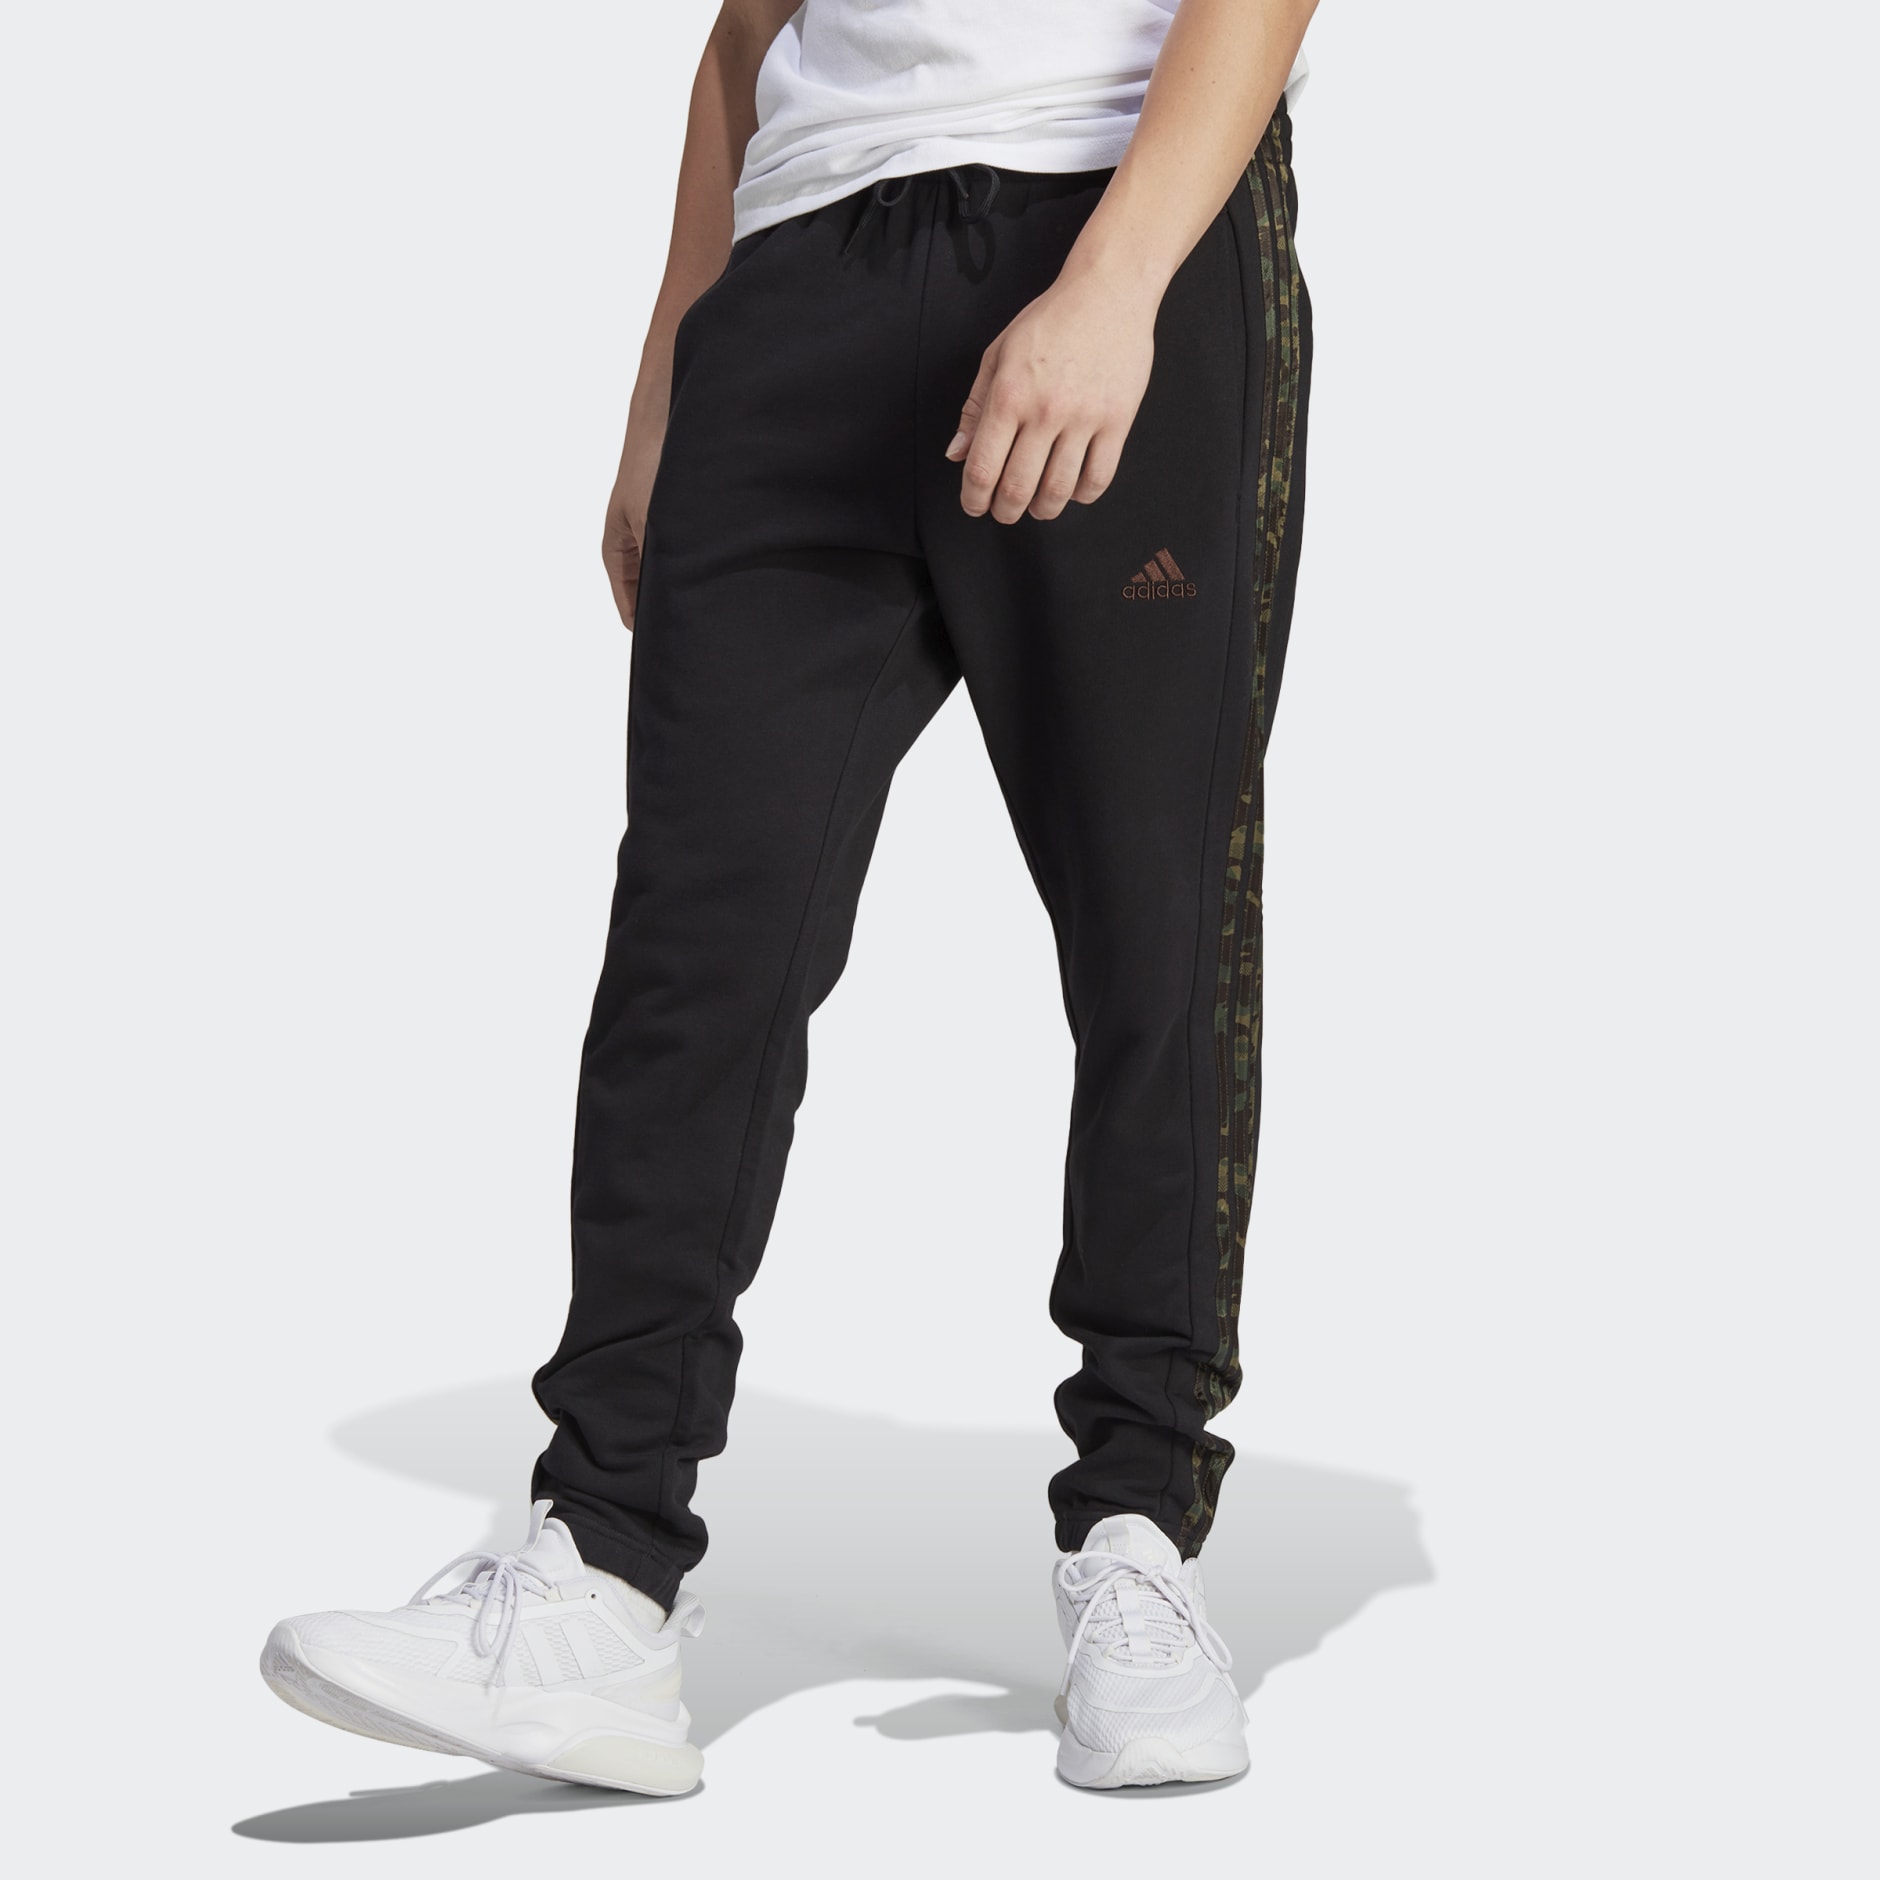 adidas Cuff Pants GH French | 3-Stripes Elastic adidas Black - Terry Essentials Tapered